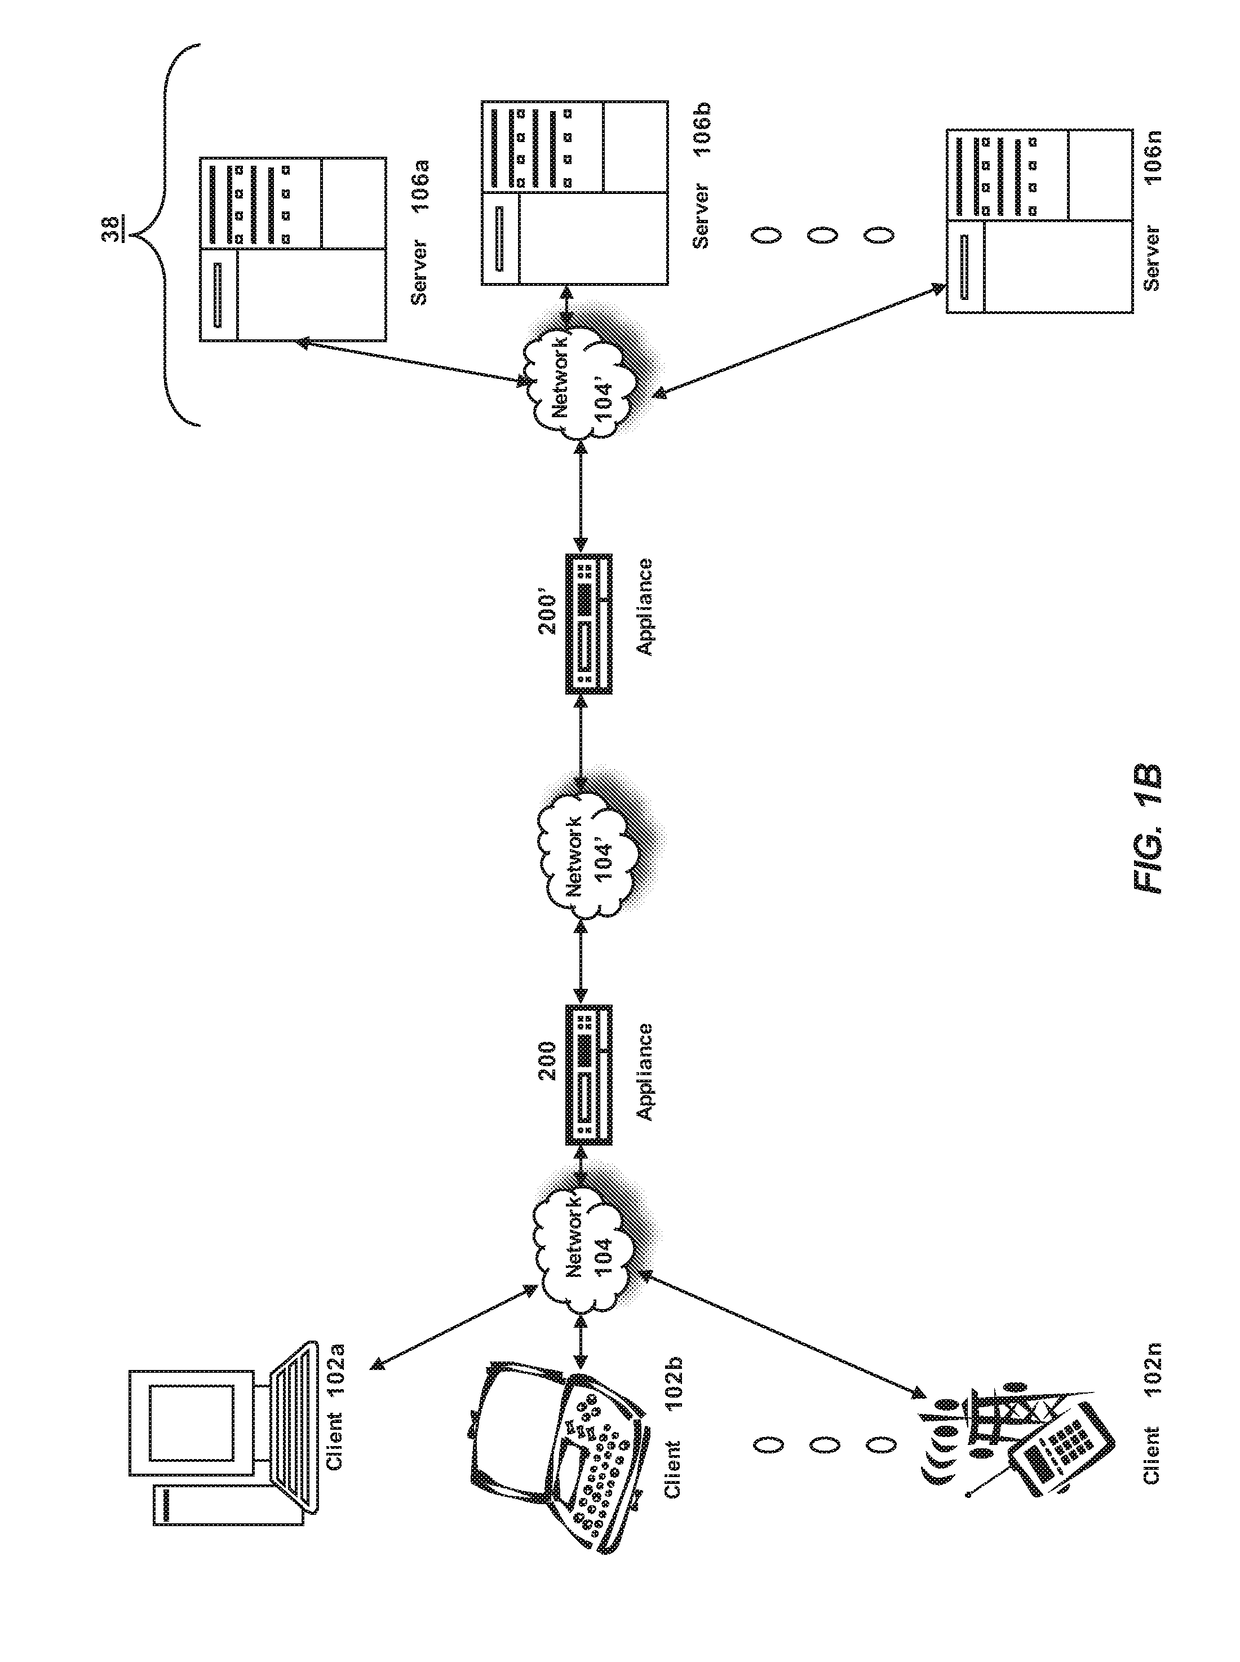 Method to remap high priority connection with large congestion window to high latency link to achieve better performance